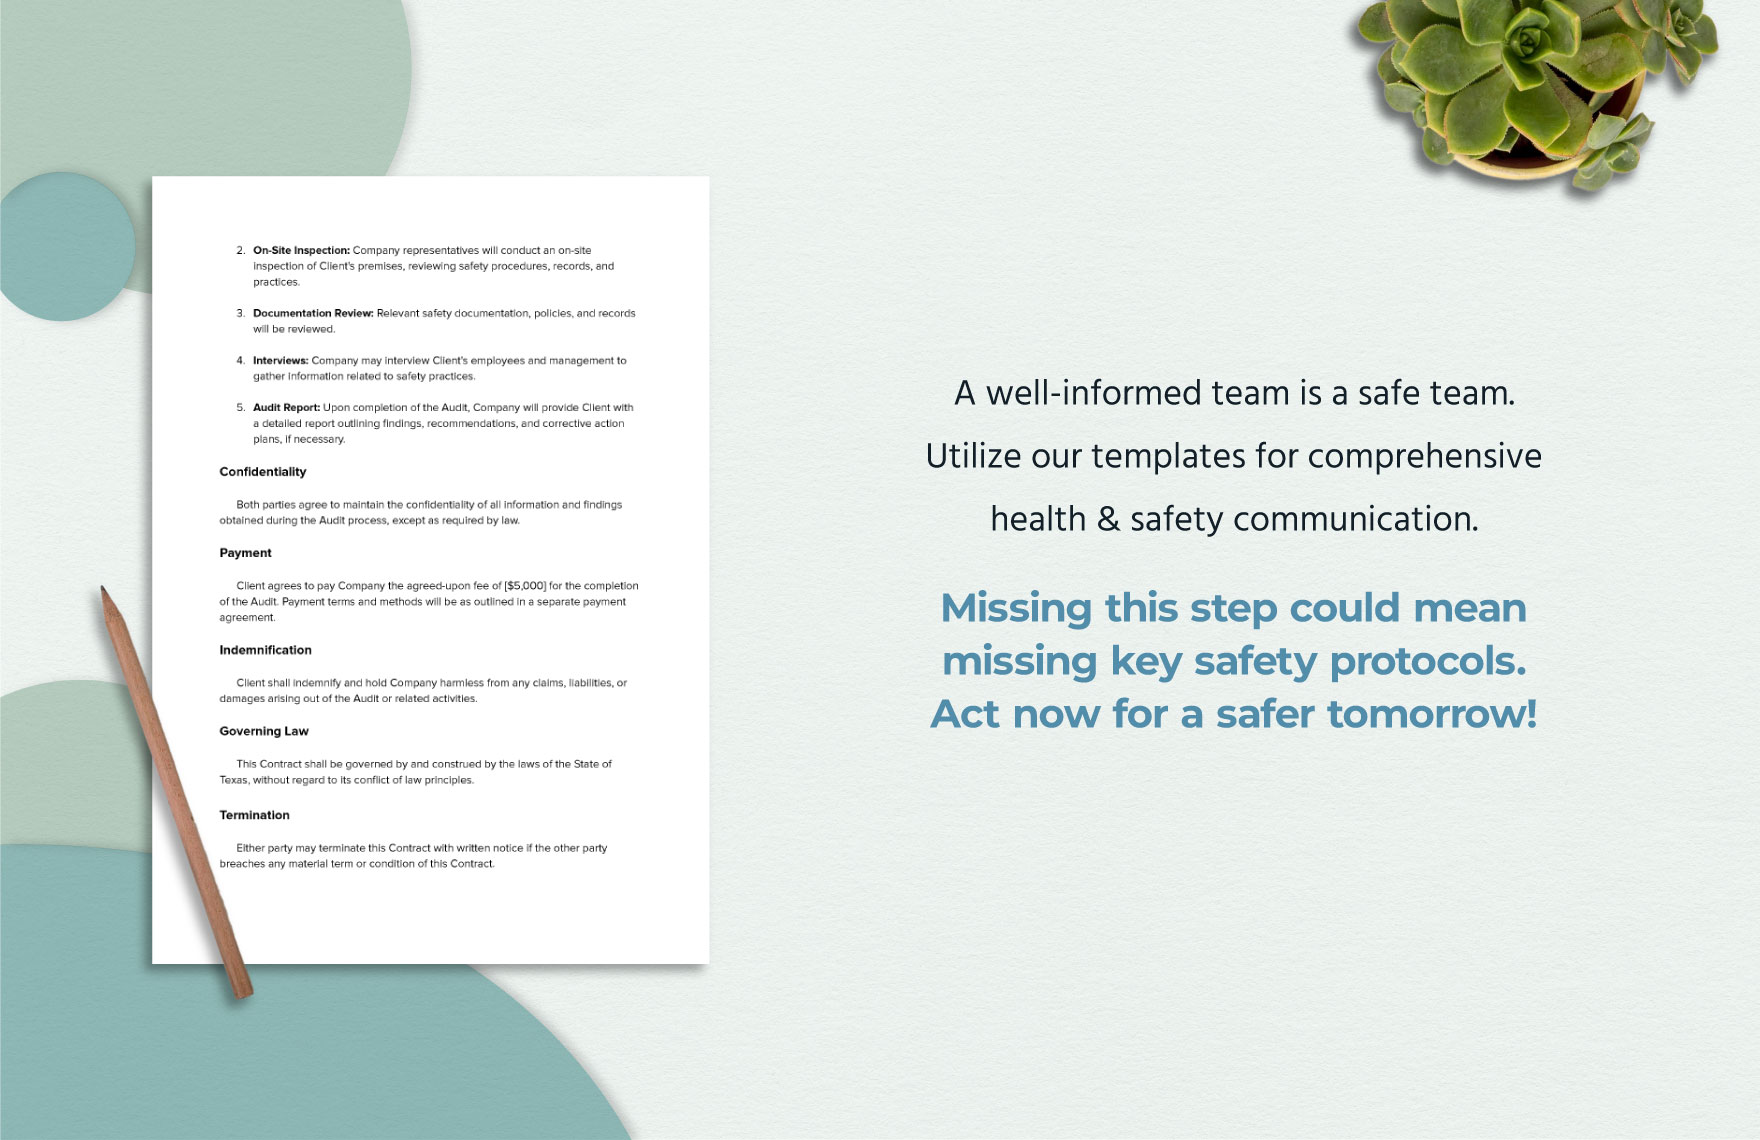 Safety Audit Contract Template